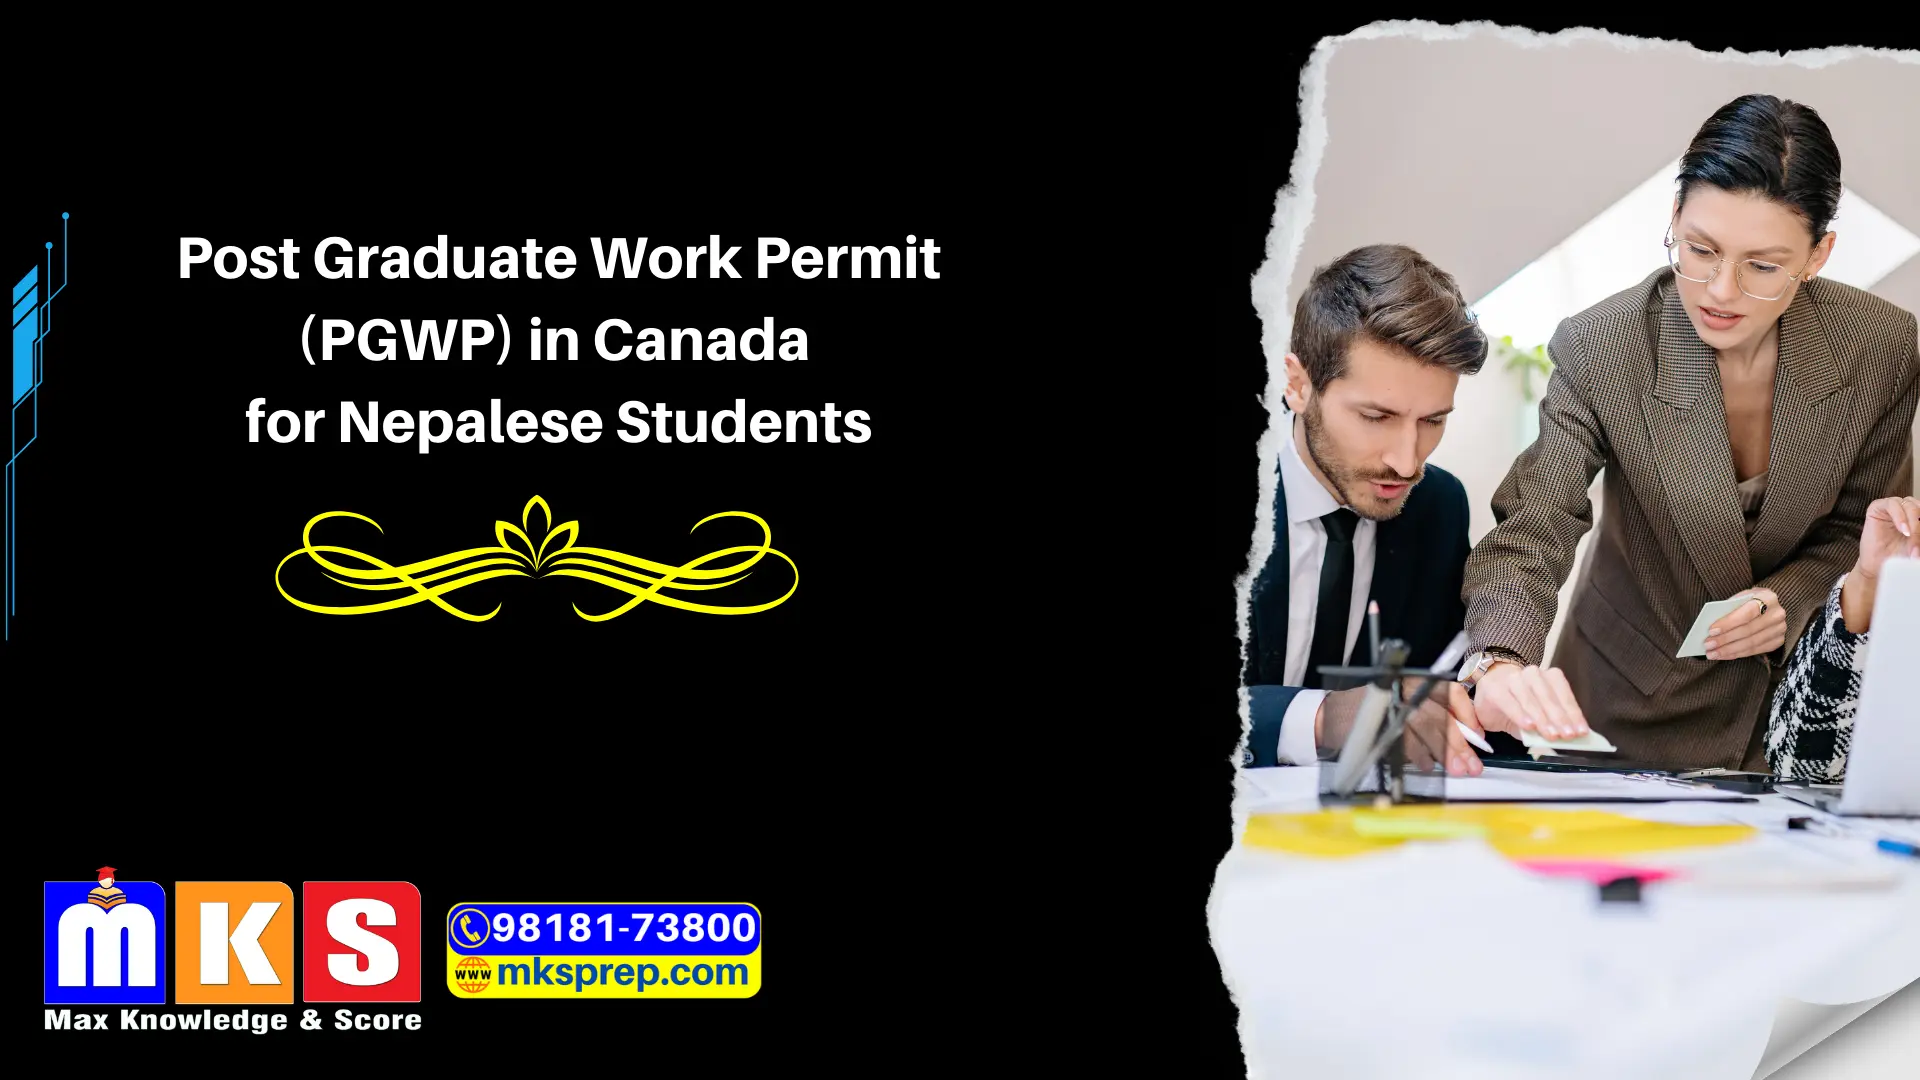 Post Graduate Work Permit (PGWP) in Canada for Nepalese Students